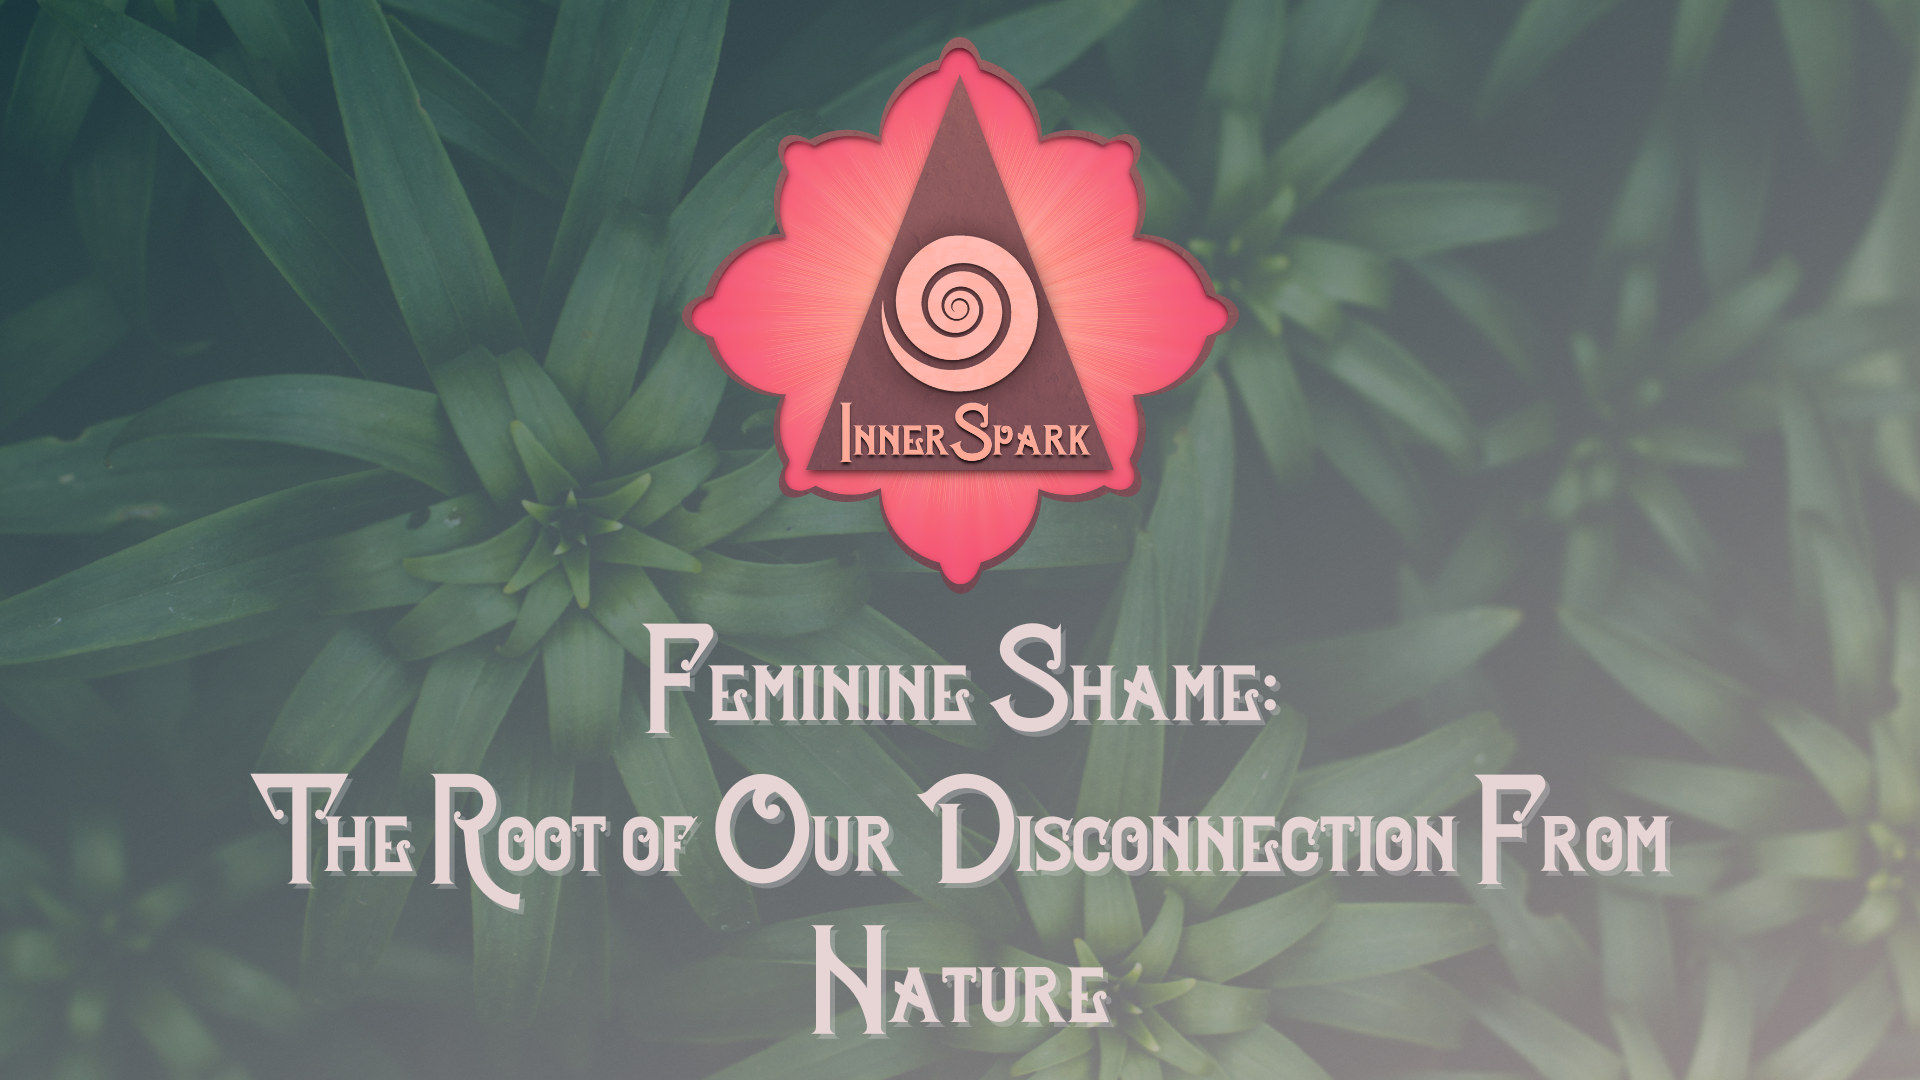 Feminine Shame: The Root of Our Disconnection From Nature